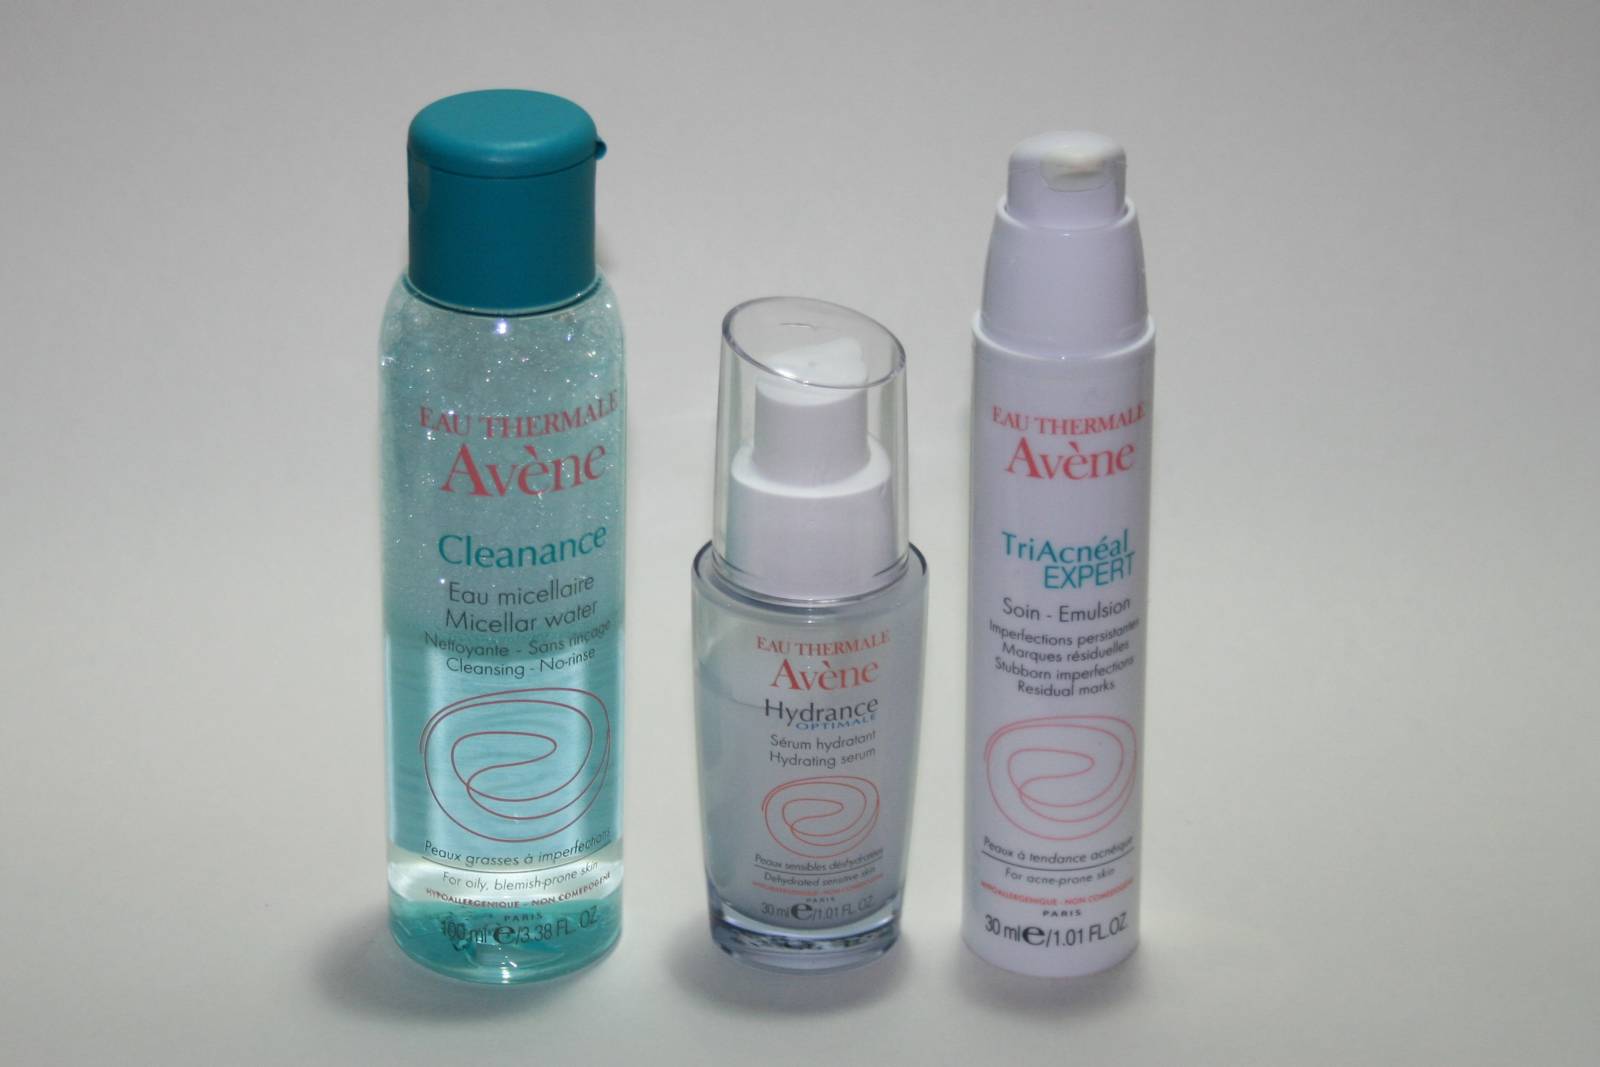 Avene Products for Tricky/Spot-Prone Skin